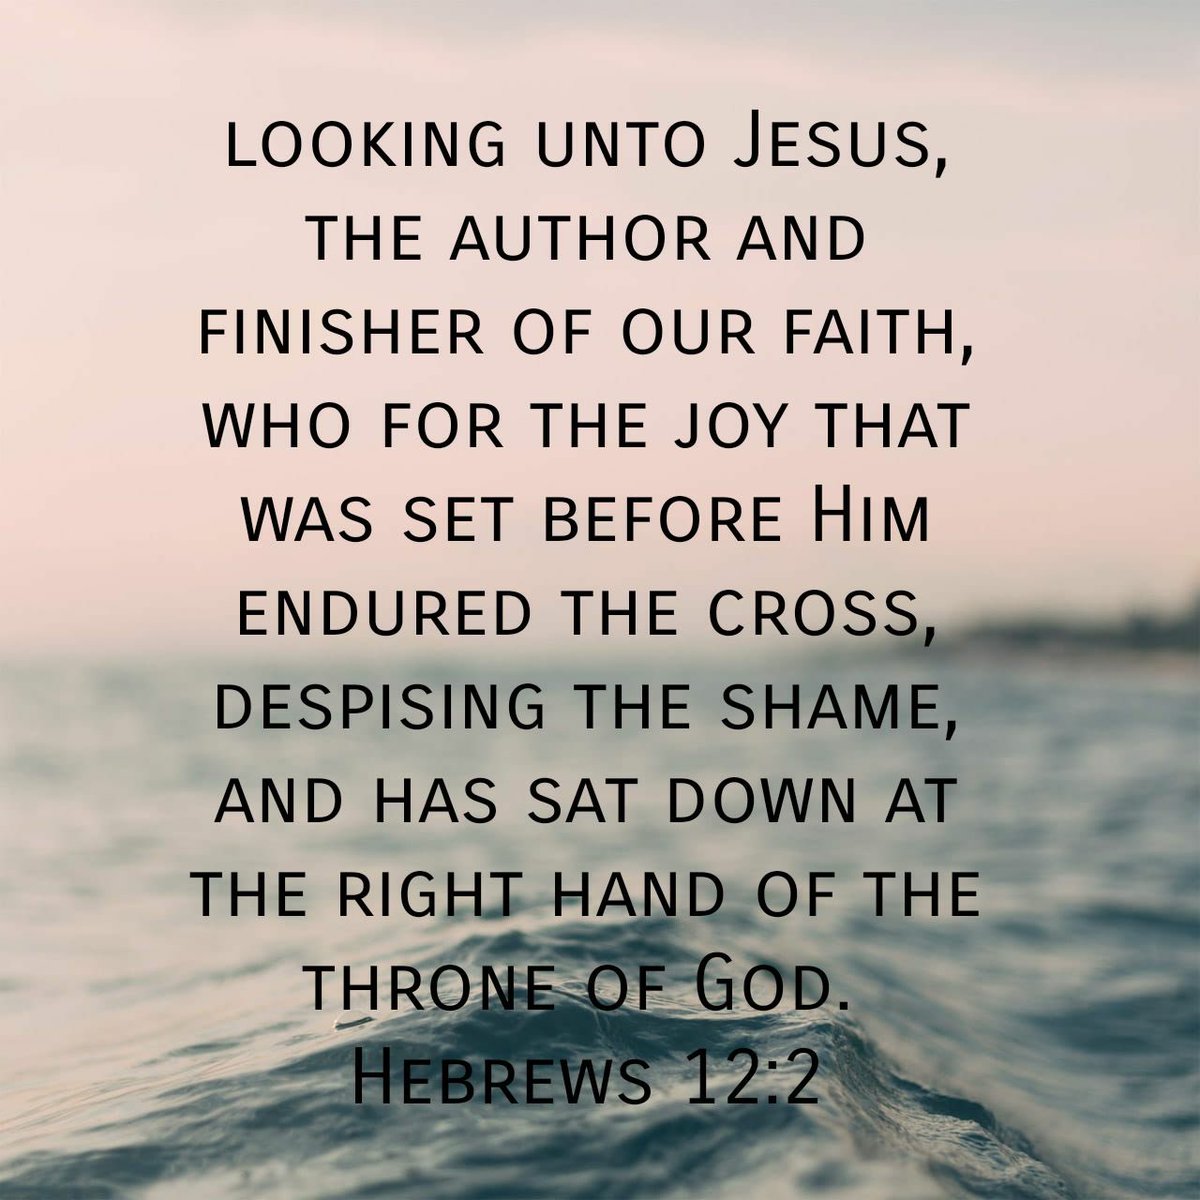 The verse of the day 🙏

Hebrews 12:2
#FOCUSONCHRIST